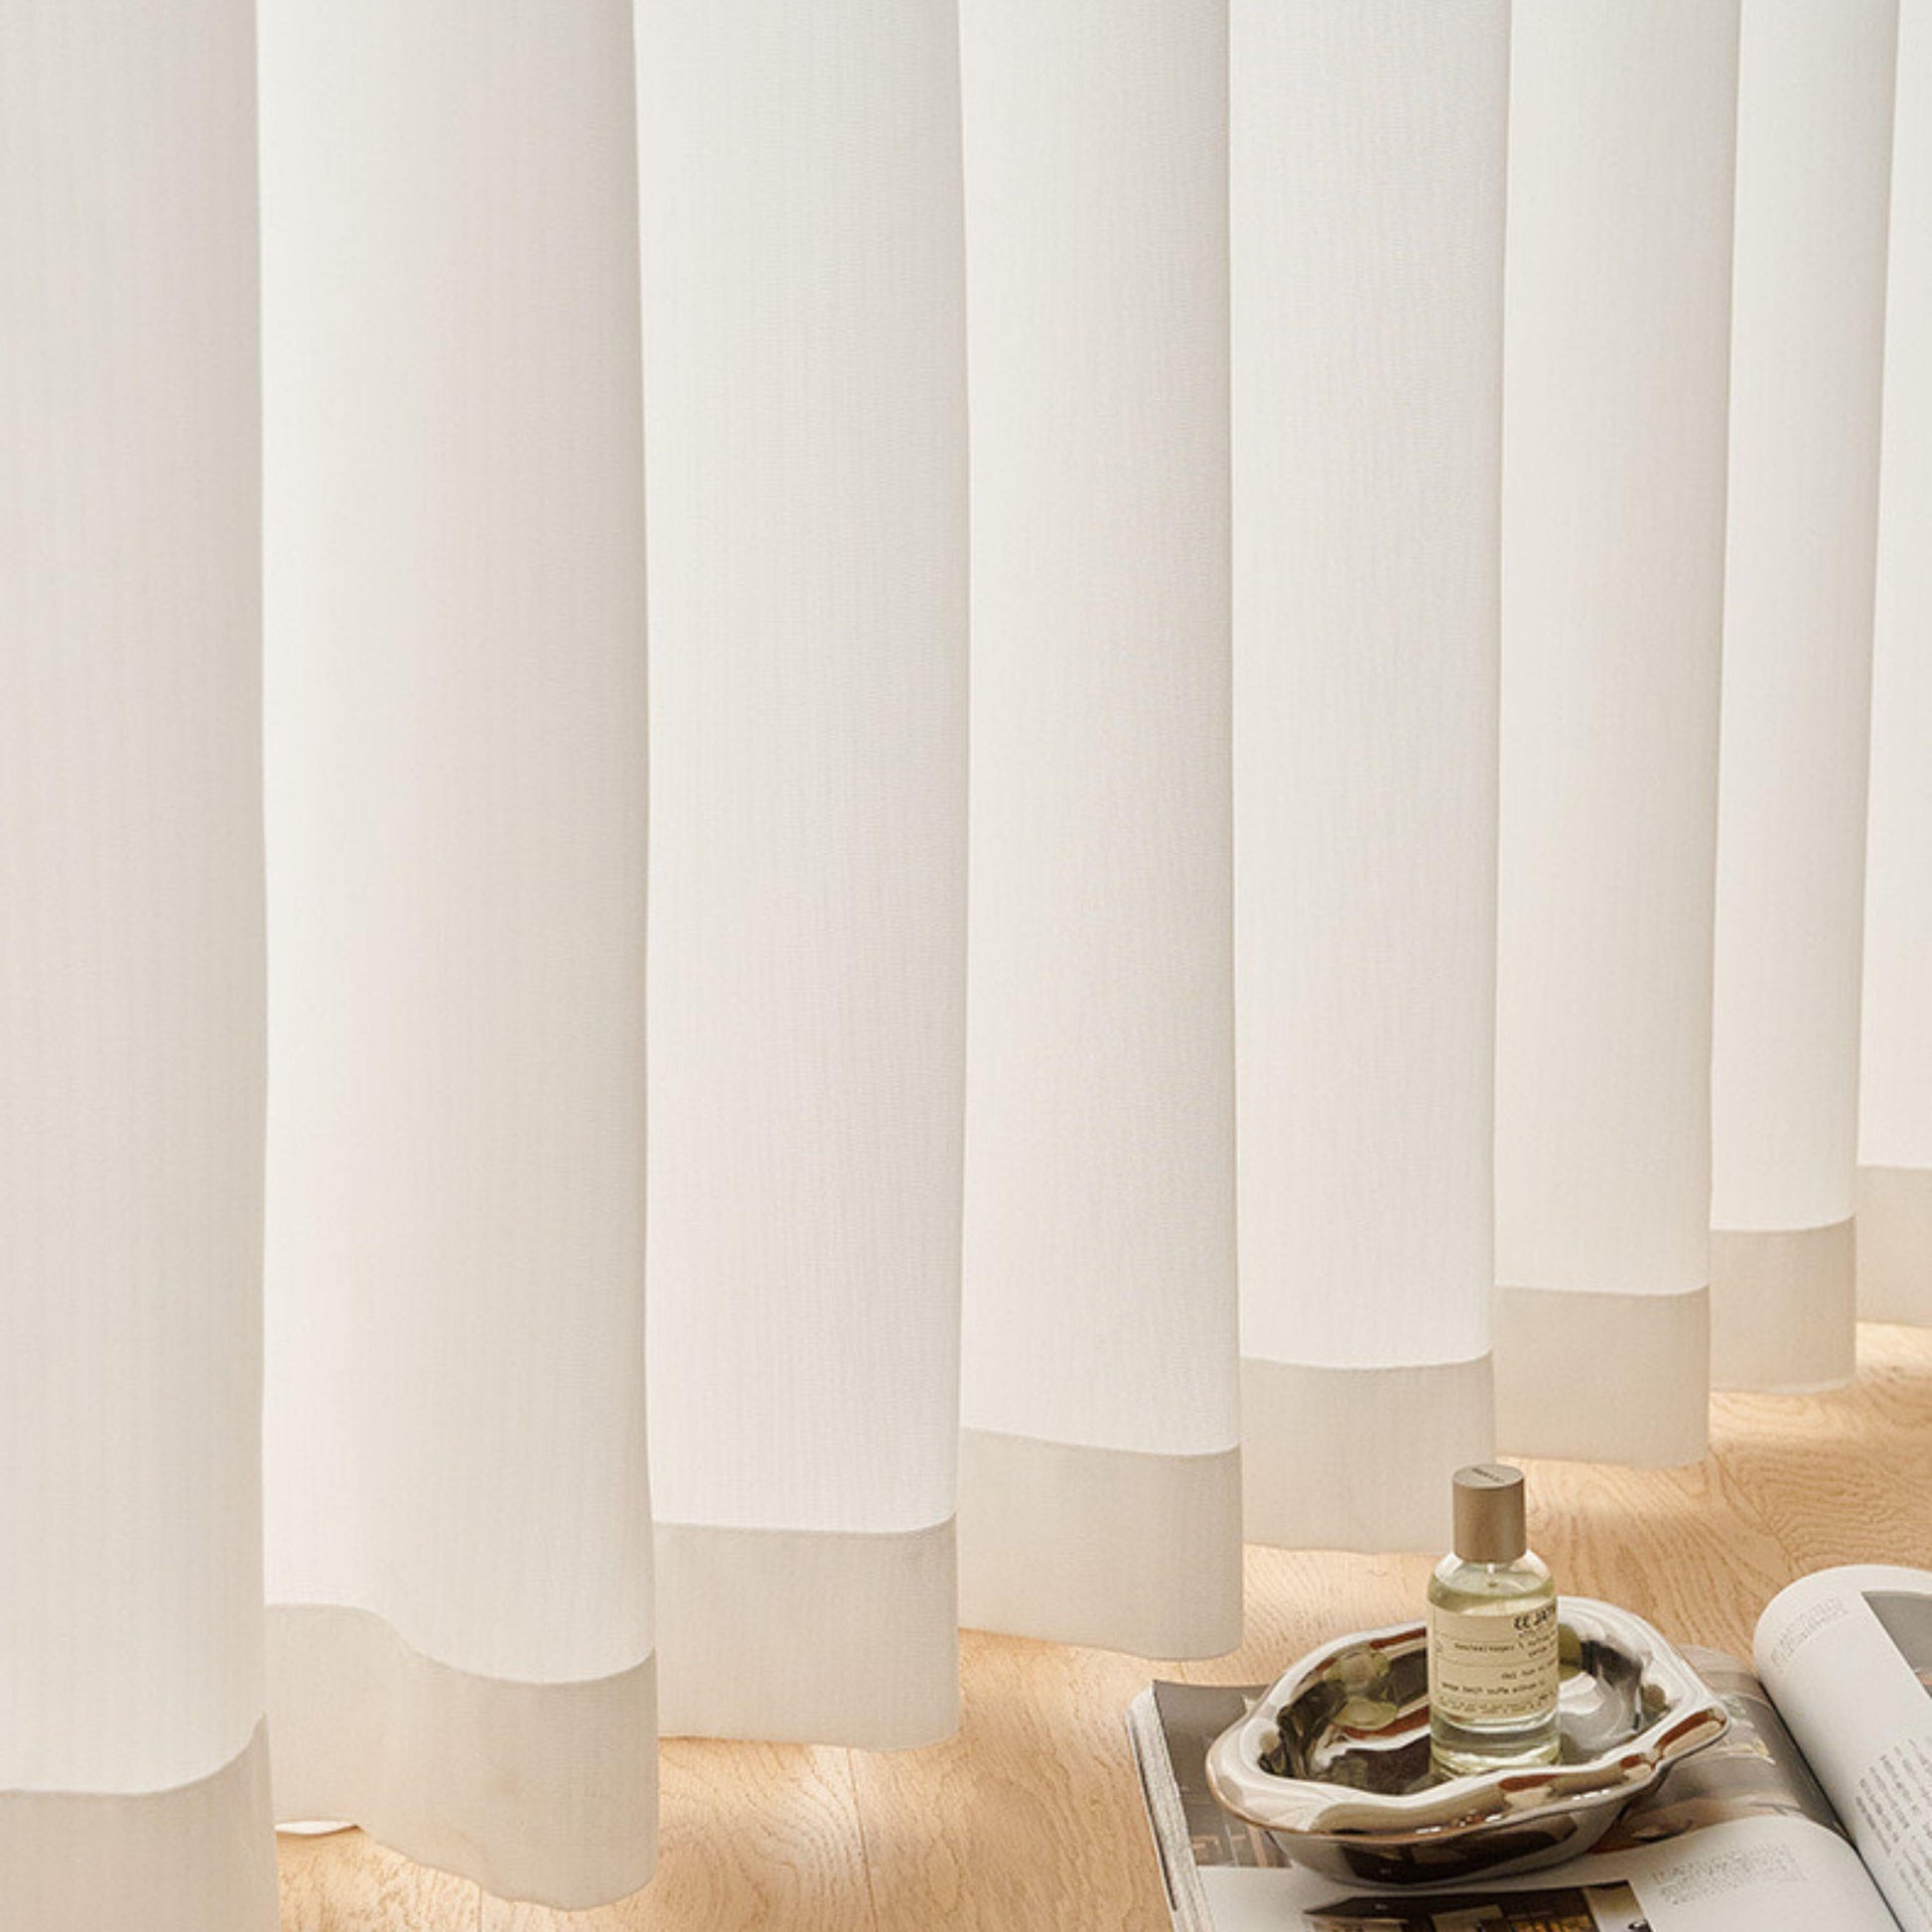 Lumos Cloud Privacy sheers - curtains that let light in but provide privacy